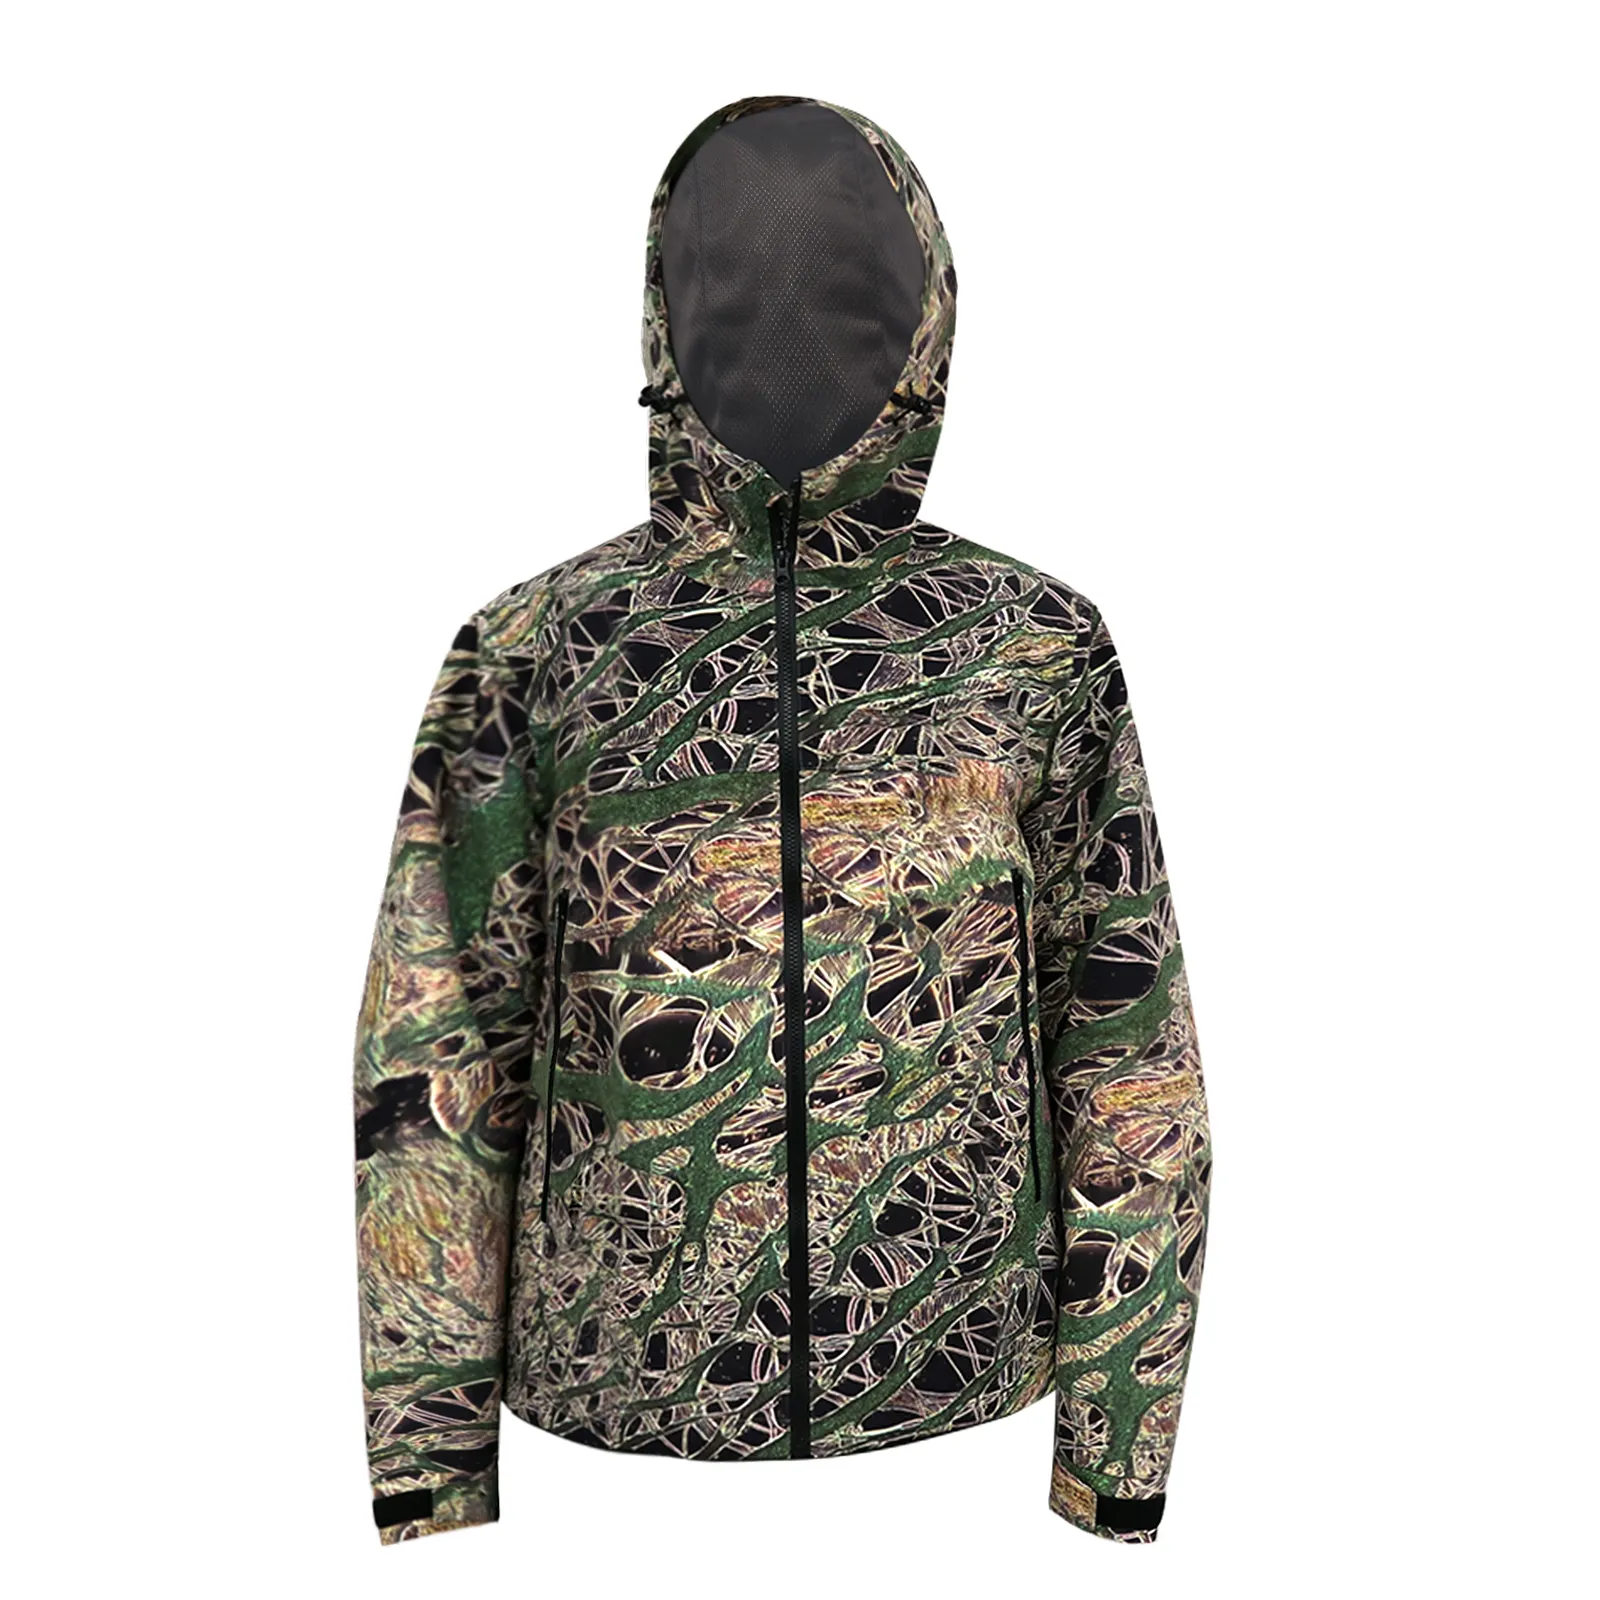 Hunting Jacket for Men Camouflage Clothing Hoodie Coat Windproof Waterproof and breathable multiple pockets